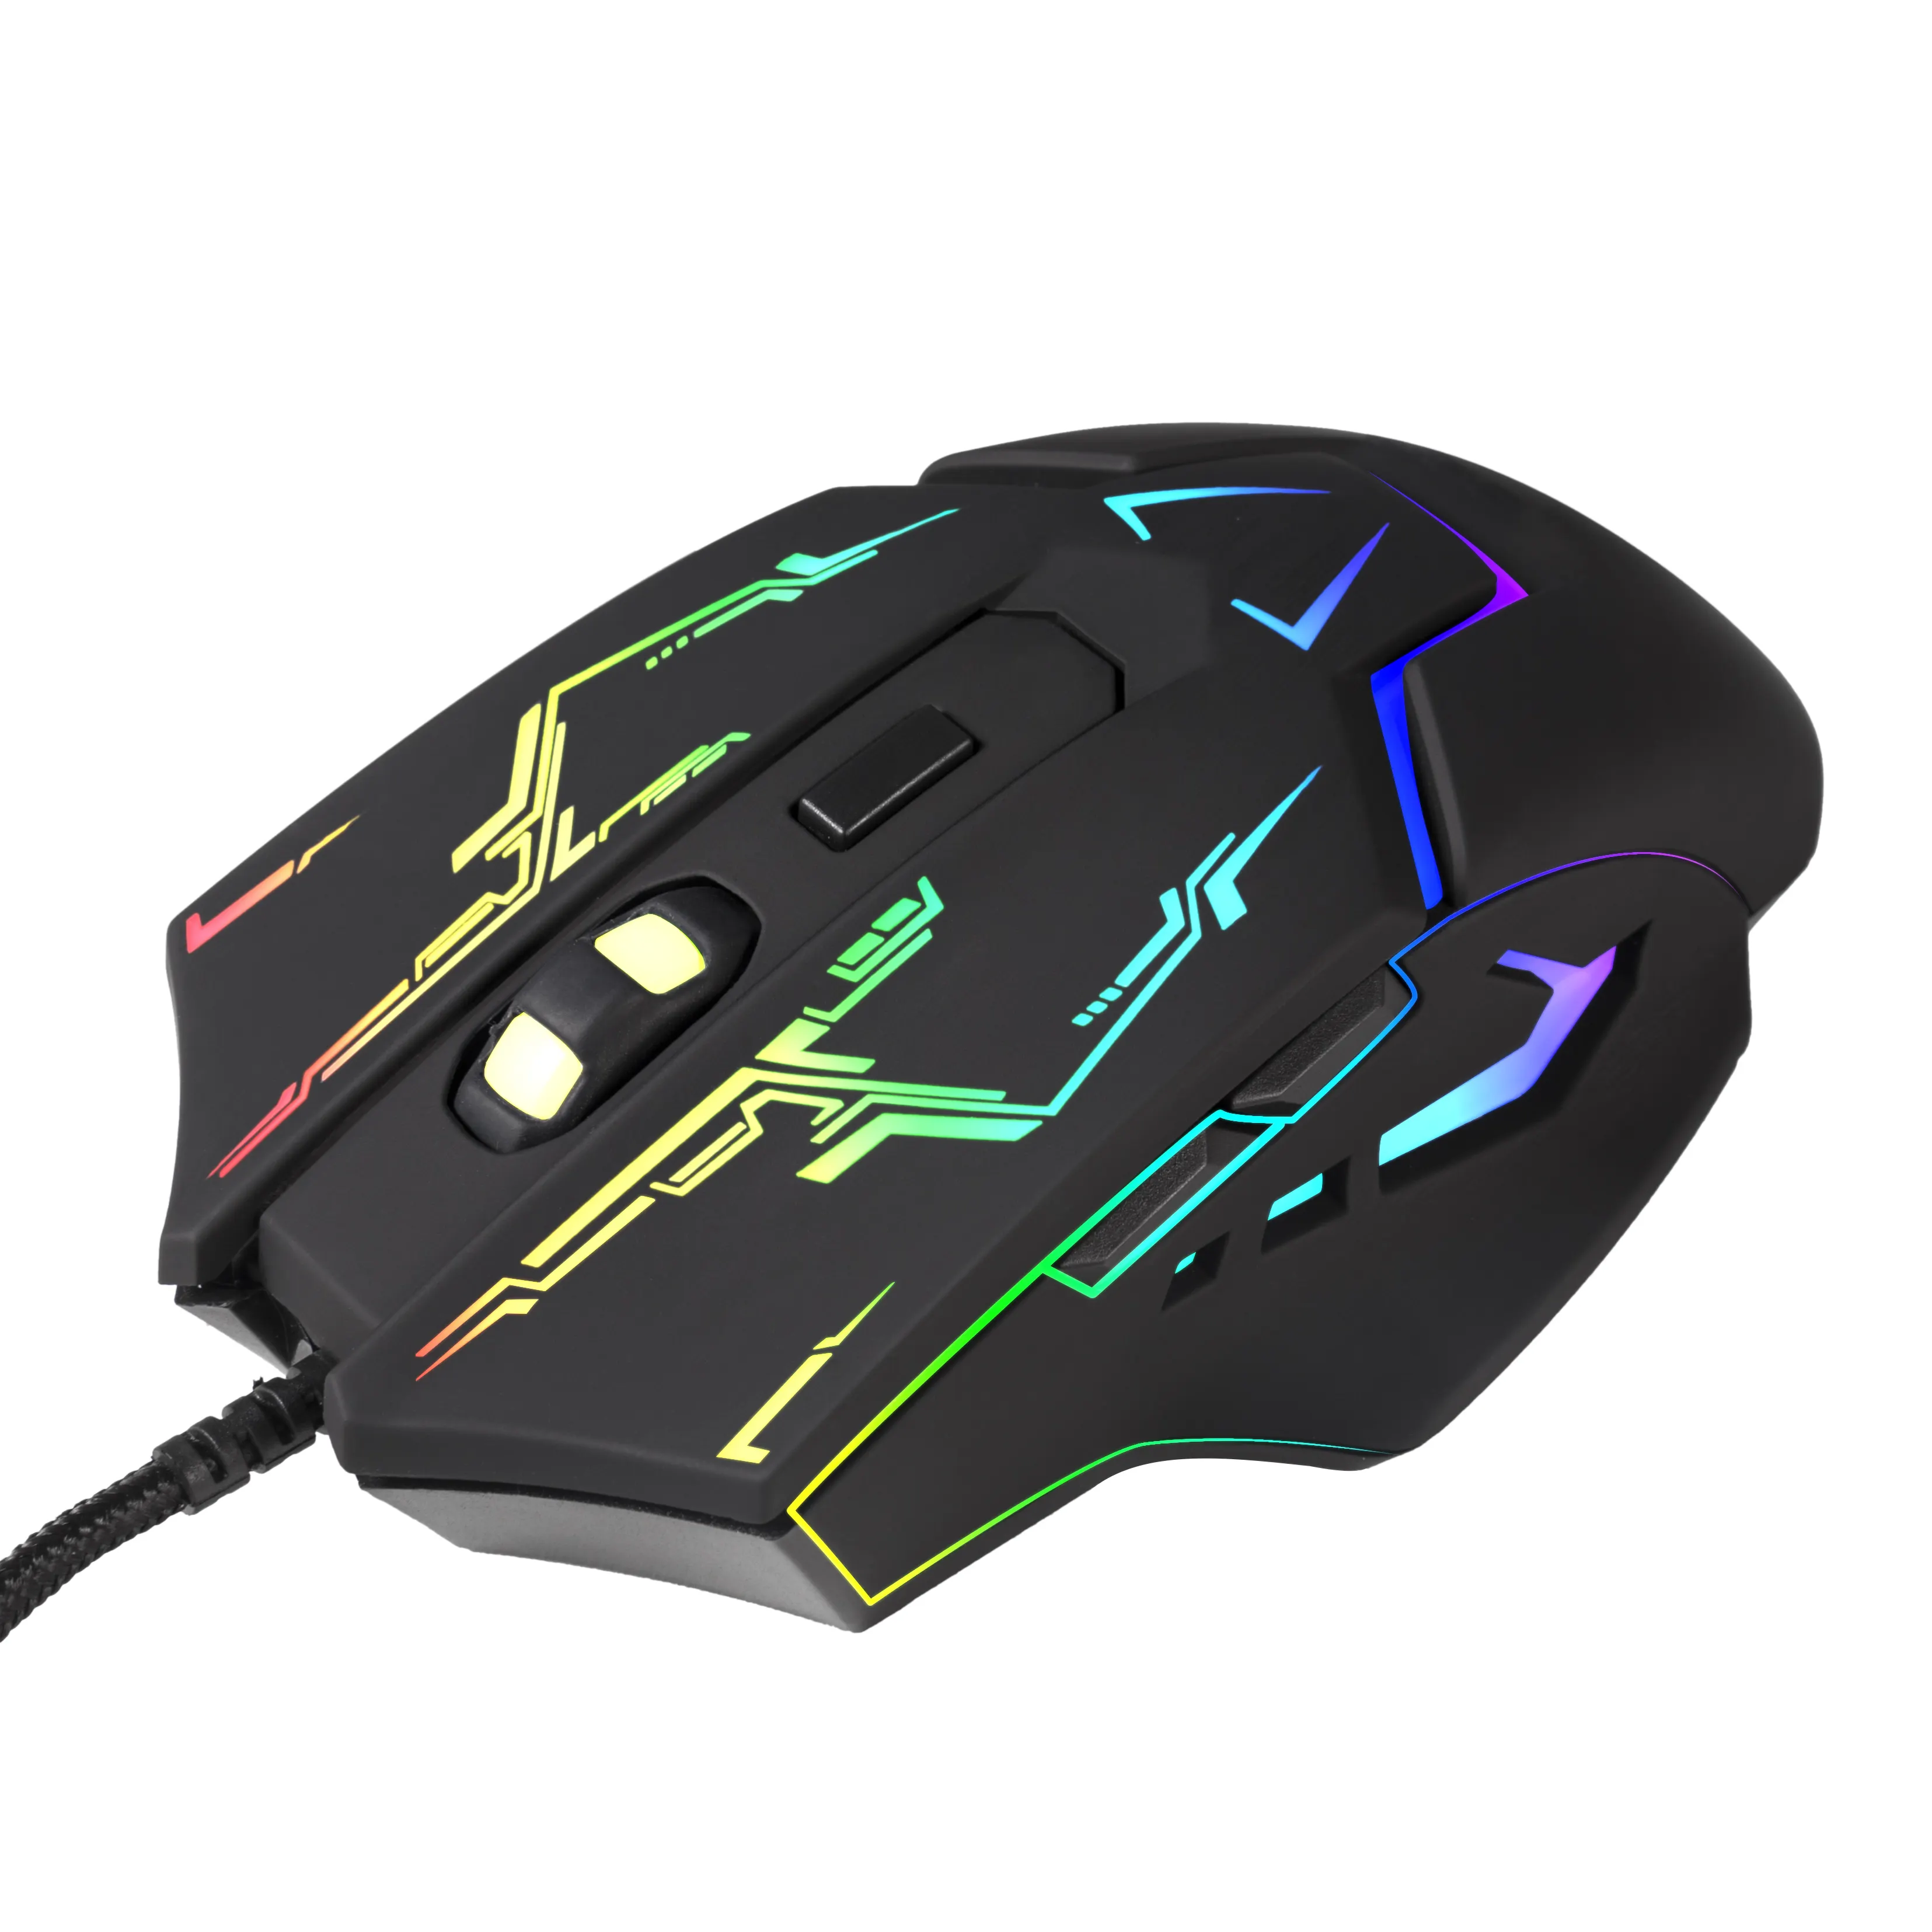 Hot sales Cheaper Good Quality Ergonomic Designs Adjustable RGB Glowing Optical Computer Game Mouse for Gamer